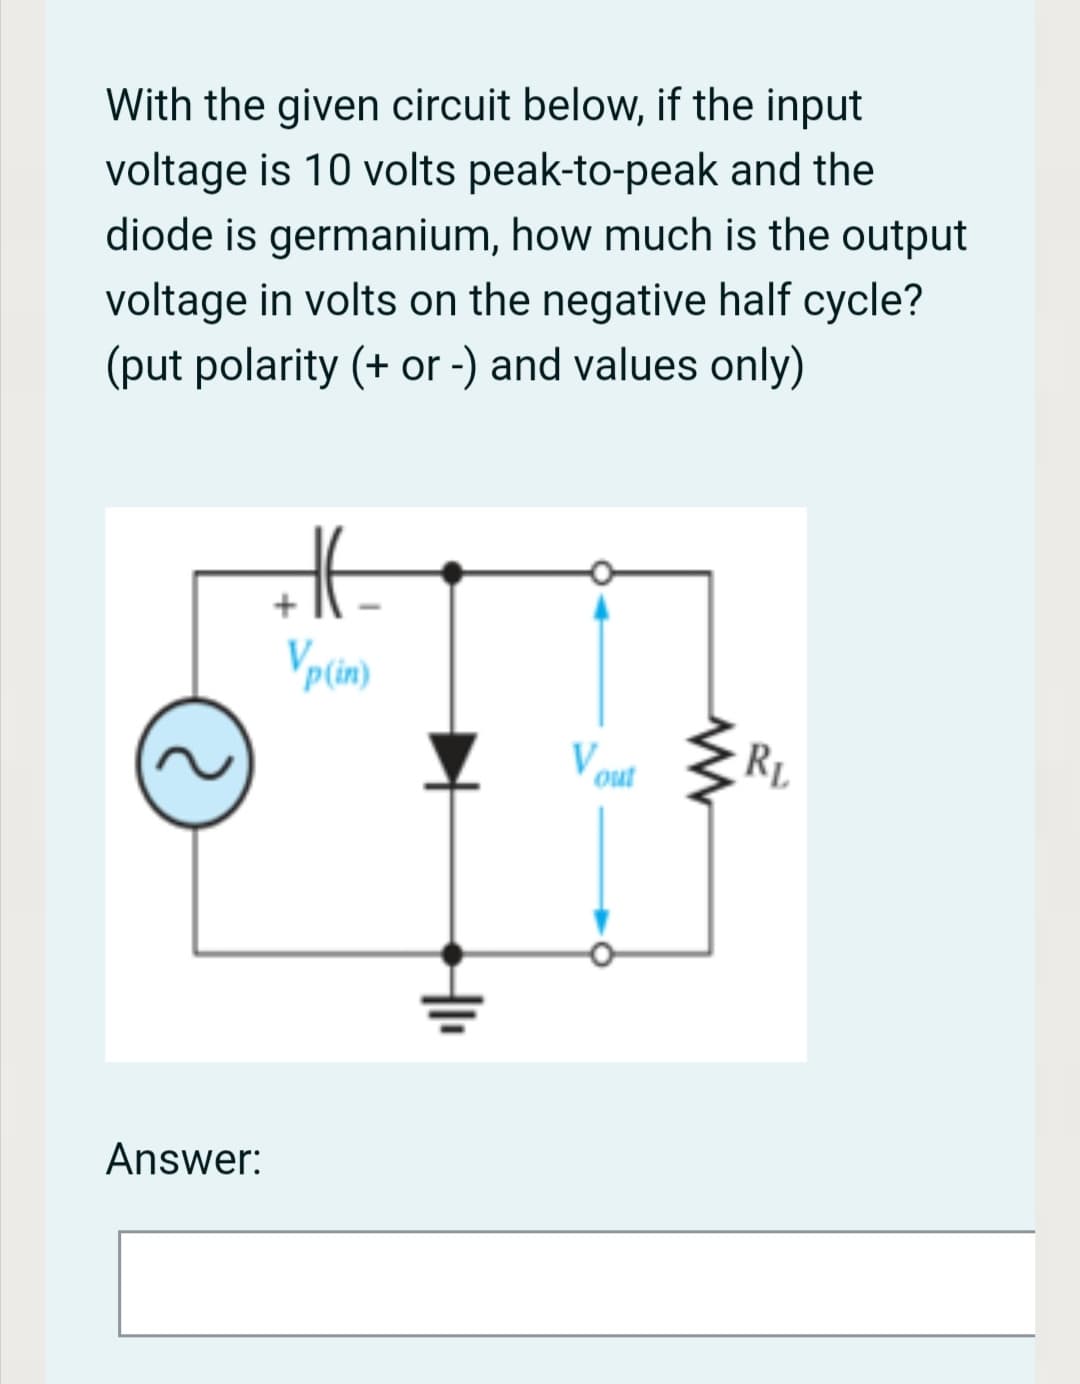 With the given circuit below, if the input
voltage is 10 volts peak-to-peak and the
diode is germanium, how much is the output
voltage in volts on the negative half cycle?
(put polarity (+ or -) and values only)
V out
RL
Answer:
